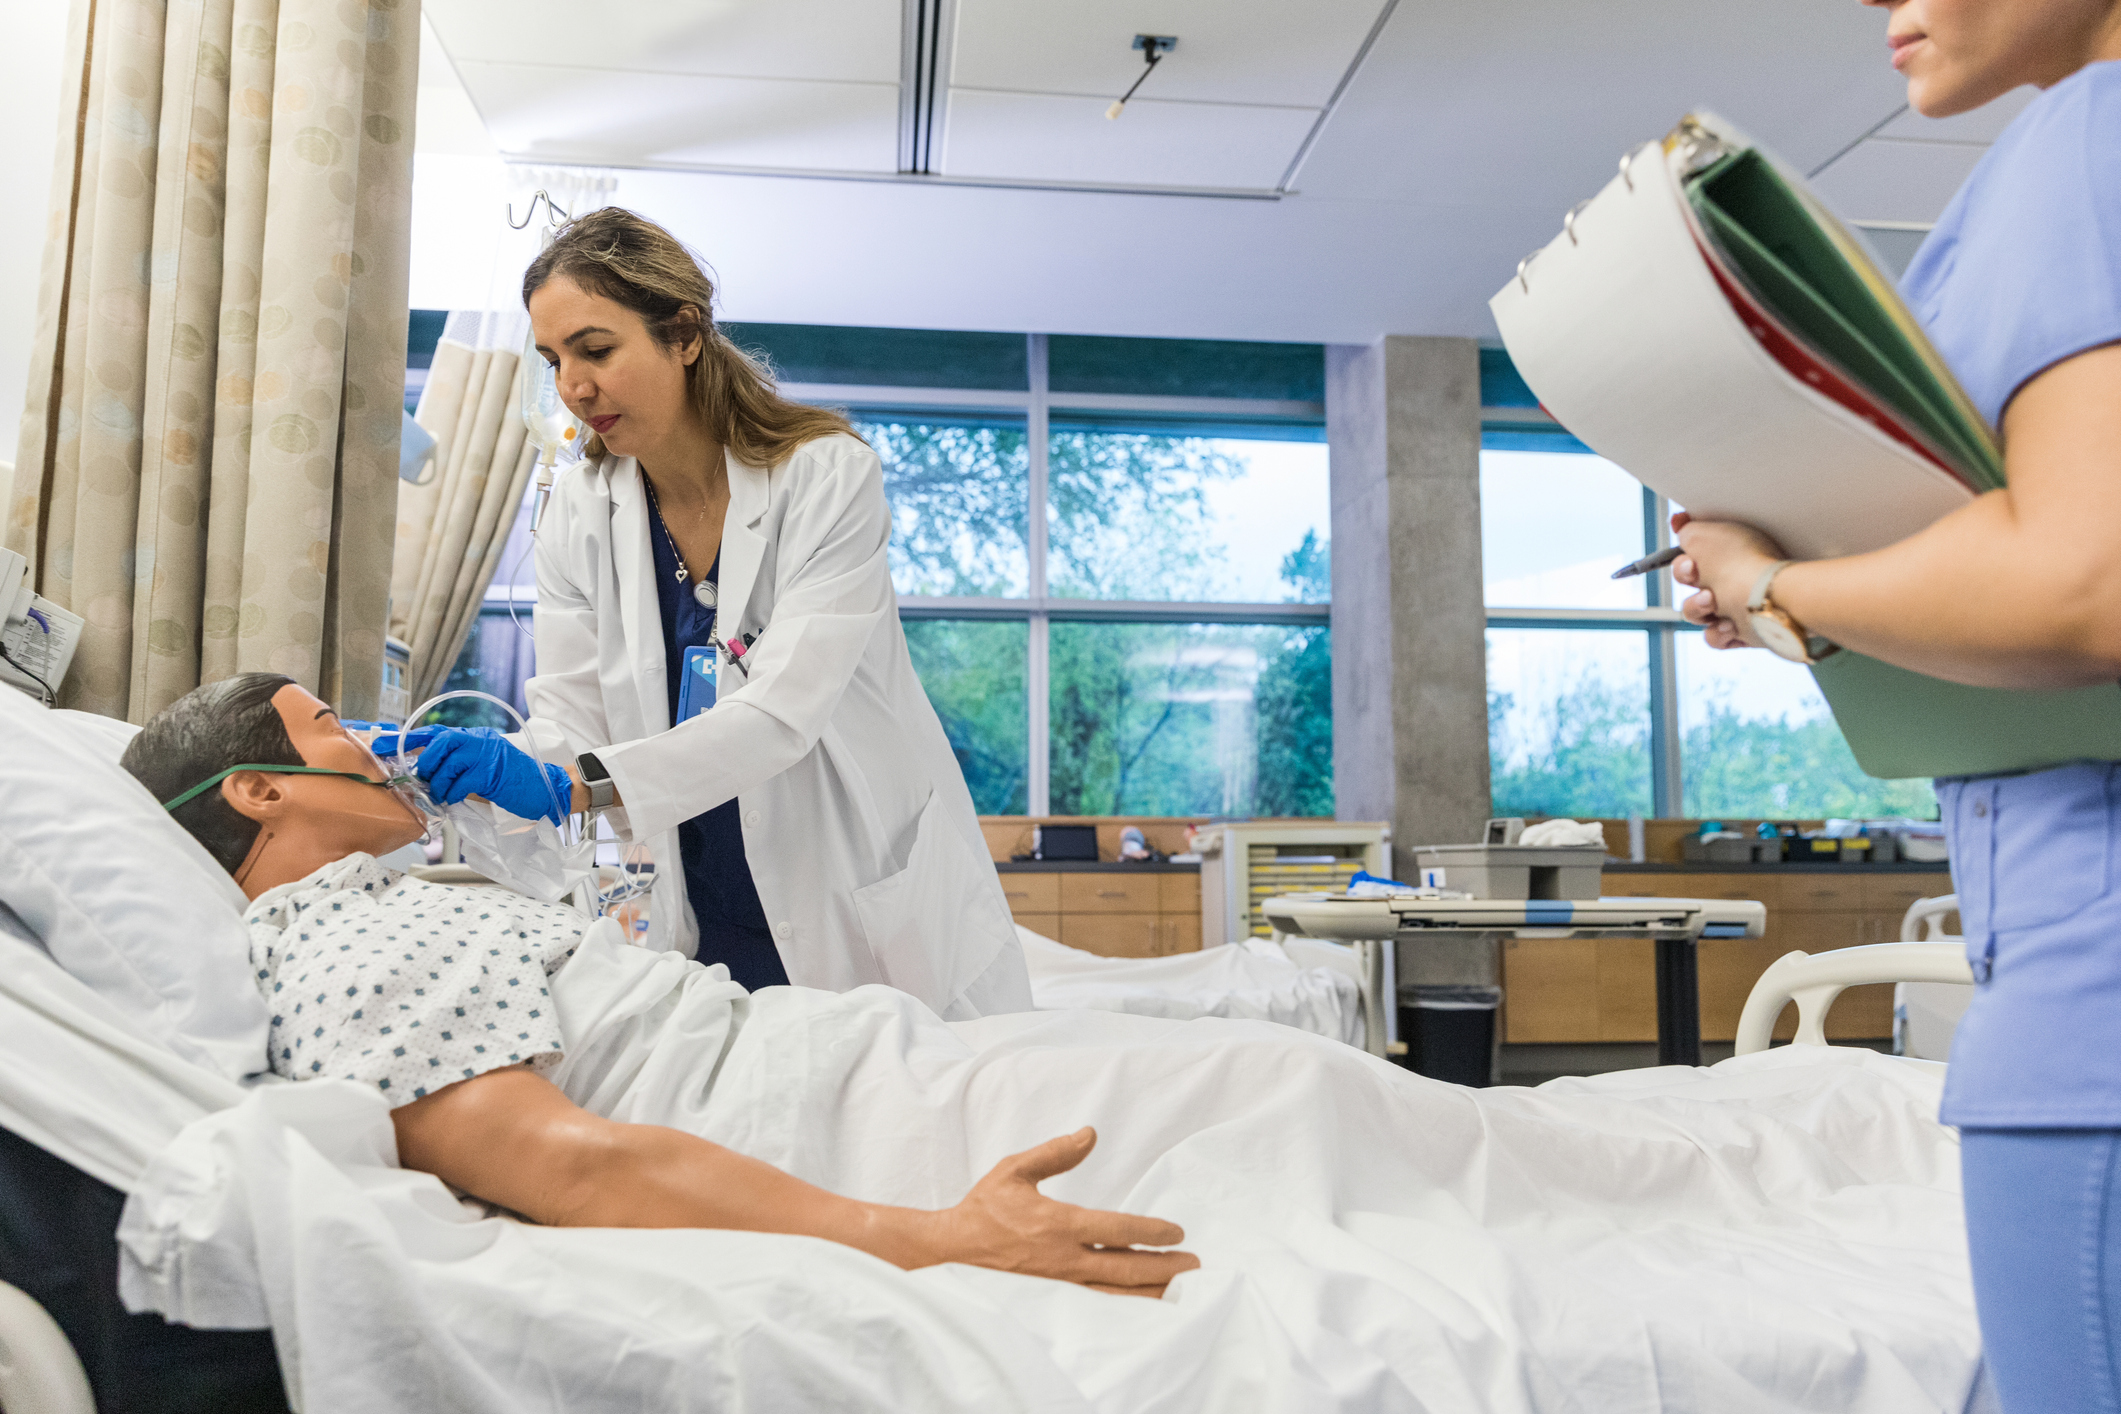 Study: Simulation Helps Nursing Students Feel More Confident